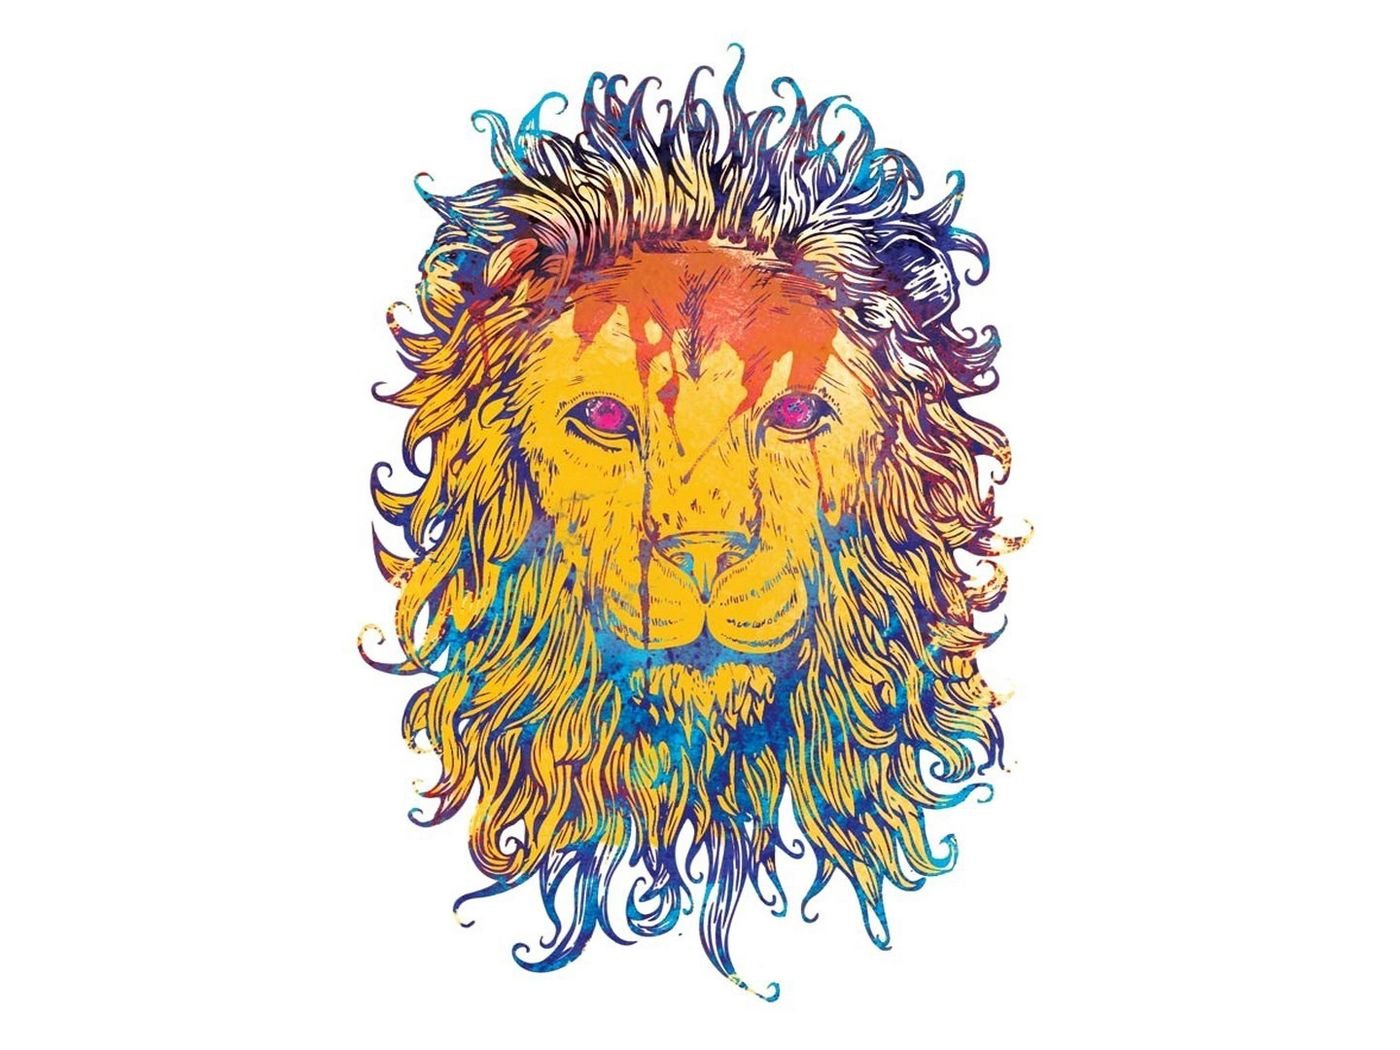 Download wallpaper 1400x1050 lion, drawing, colorful, king, king of beasts standard 4:3 HD background